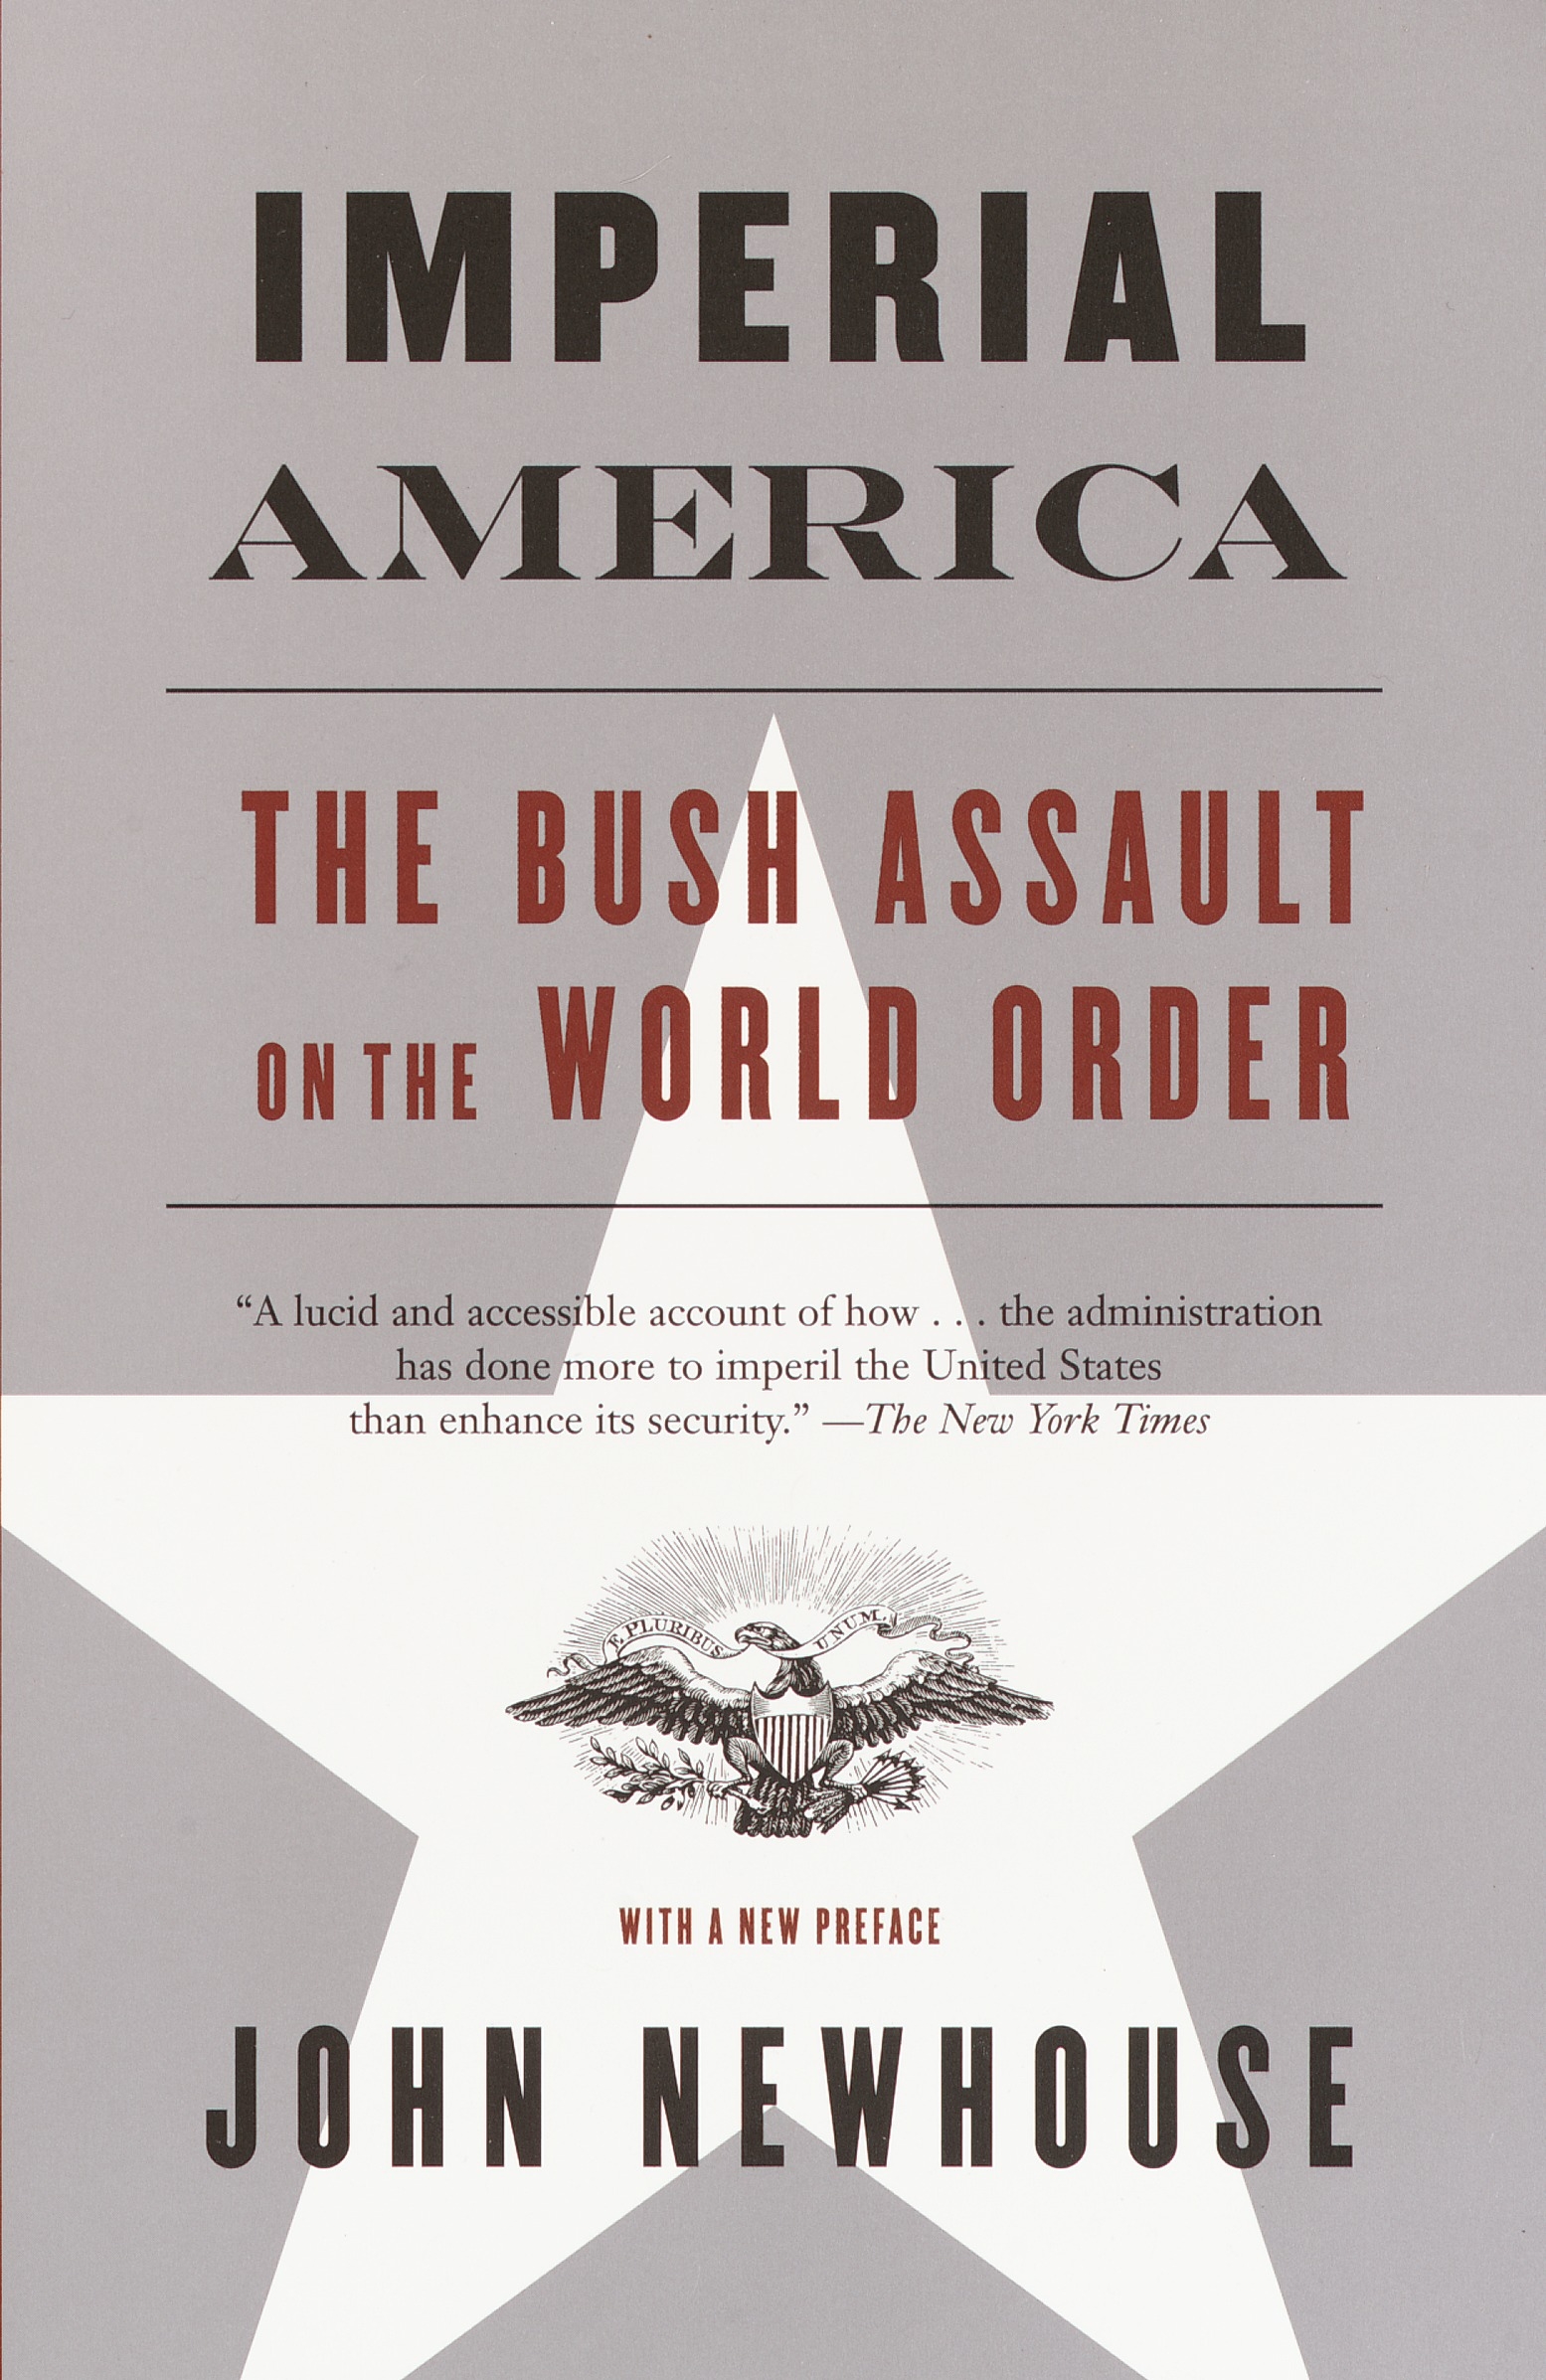 Imperial America - The Bush Assault on the World Order